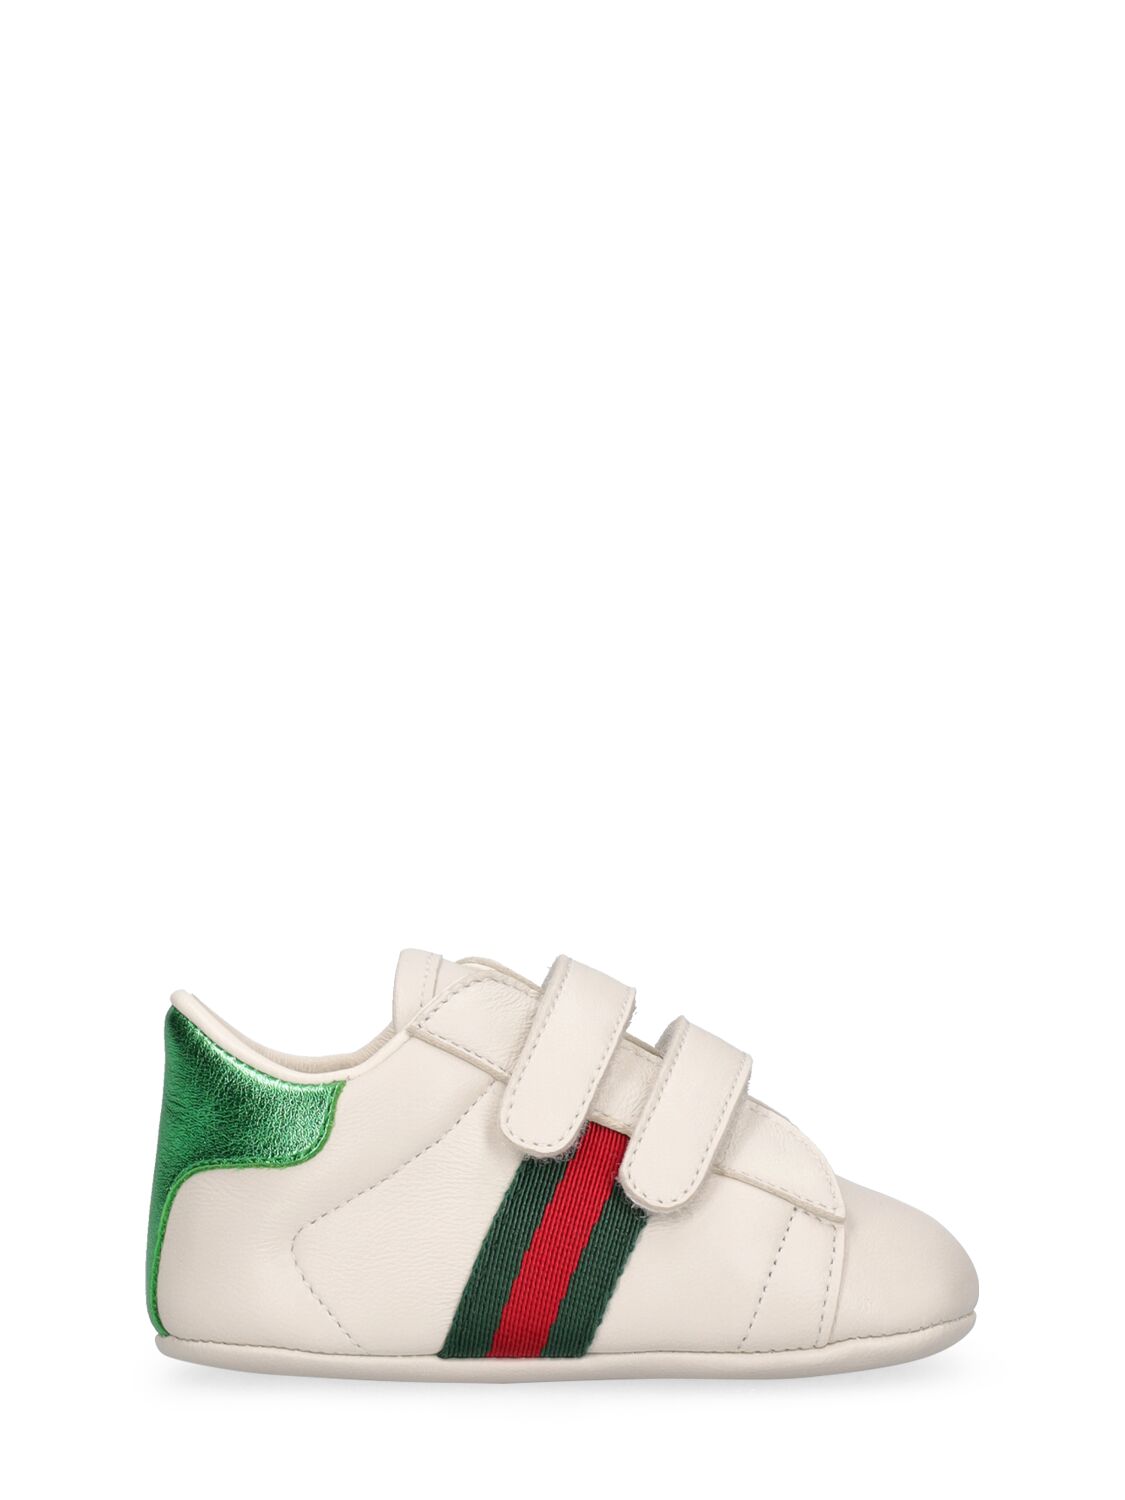 Gucci Kids' Baby New Ace Pre-walker Shoes In White